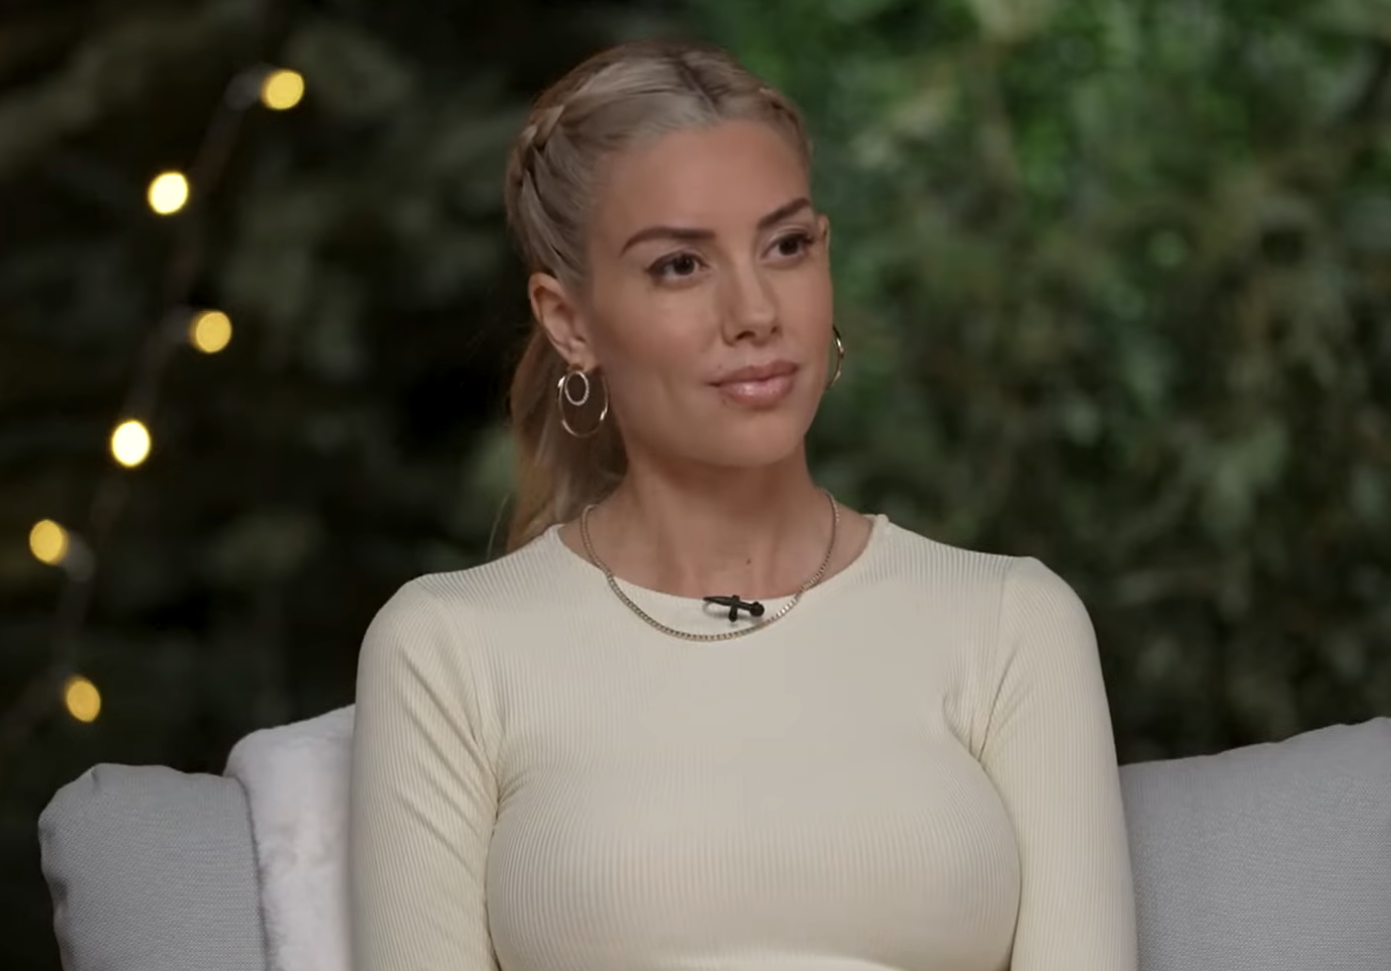 Heather Rae El Moussa on a talk show discussing co-parenting, wearing a simple crewneck top